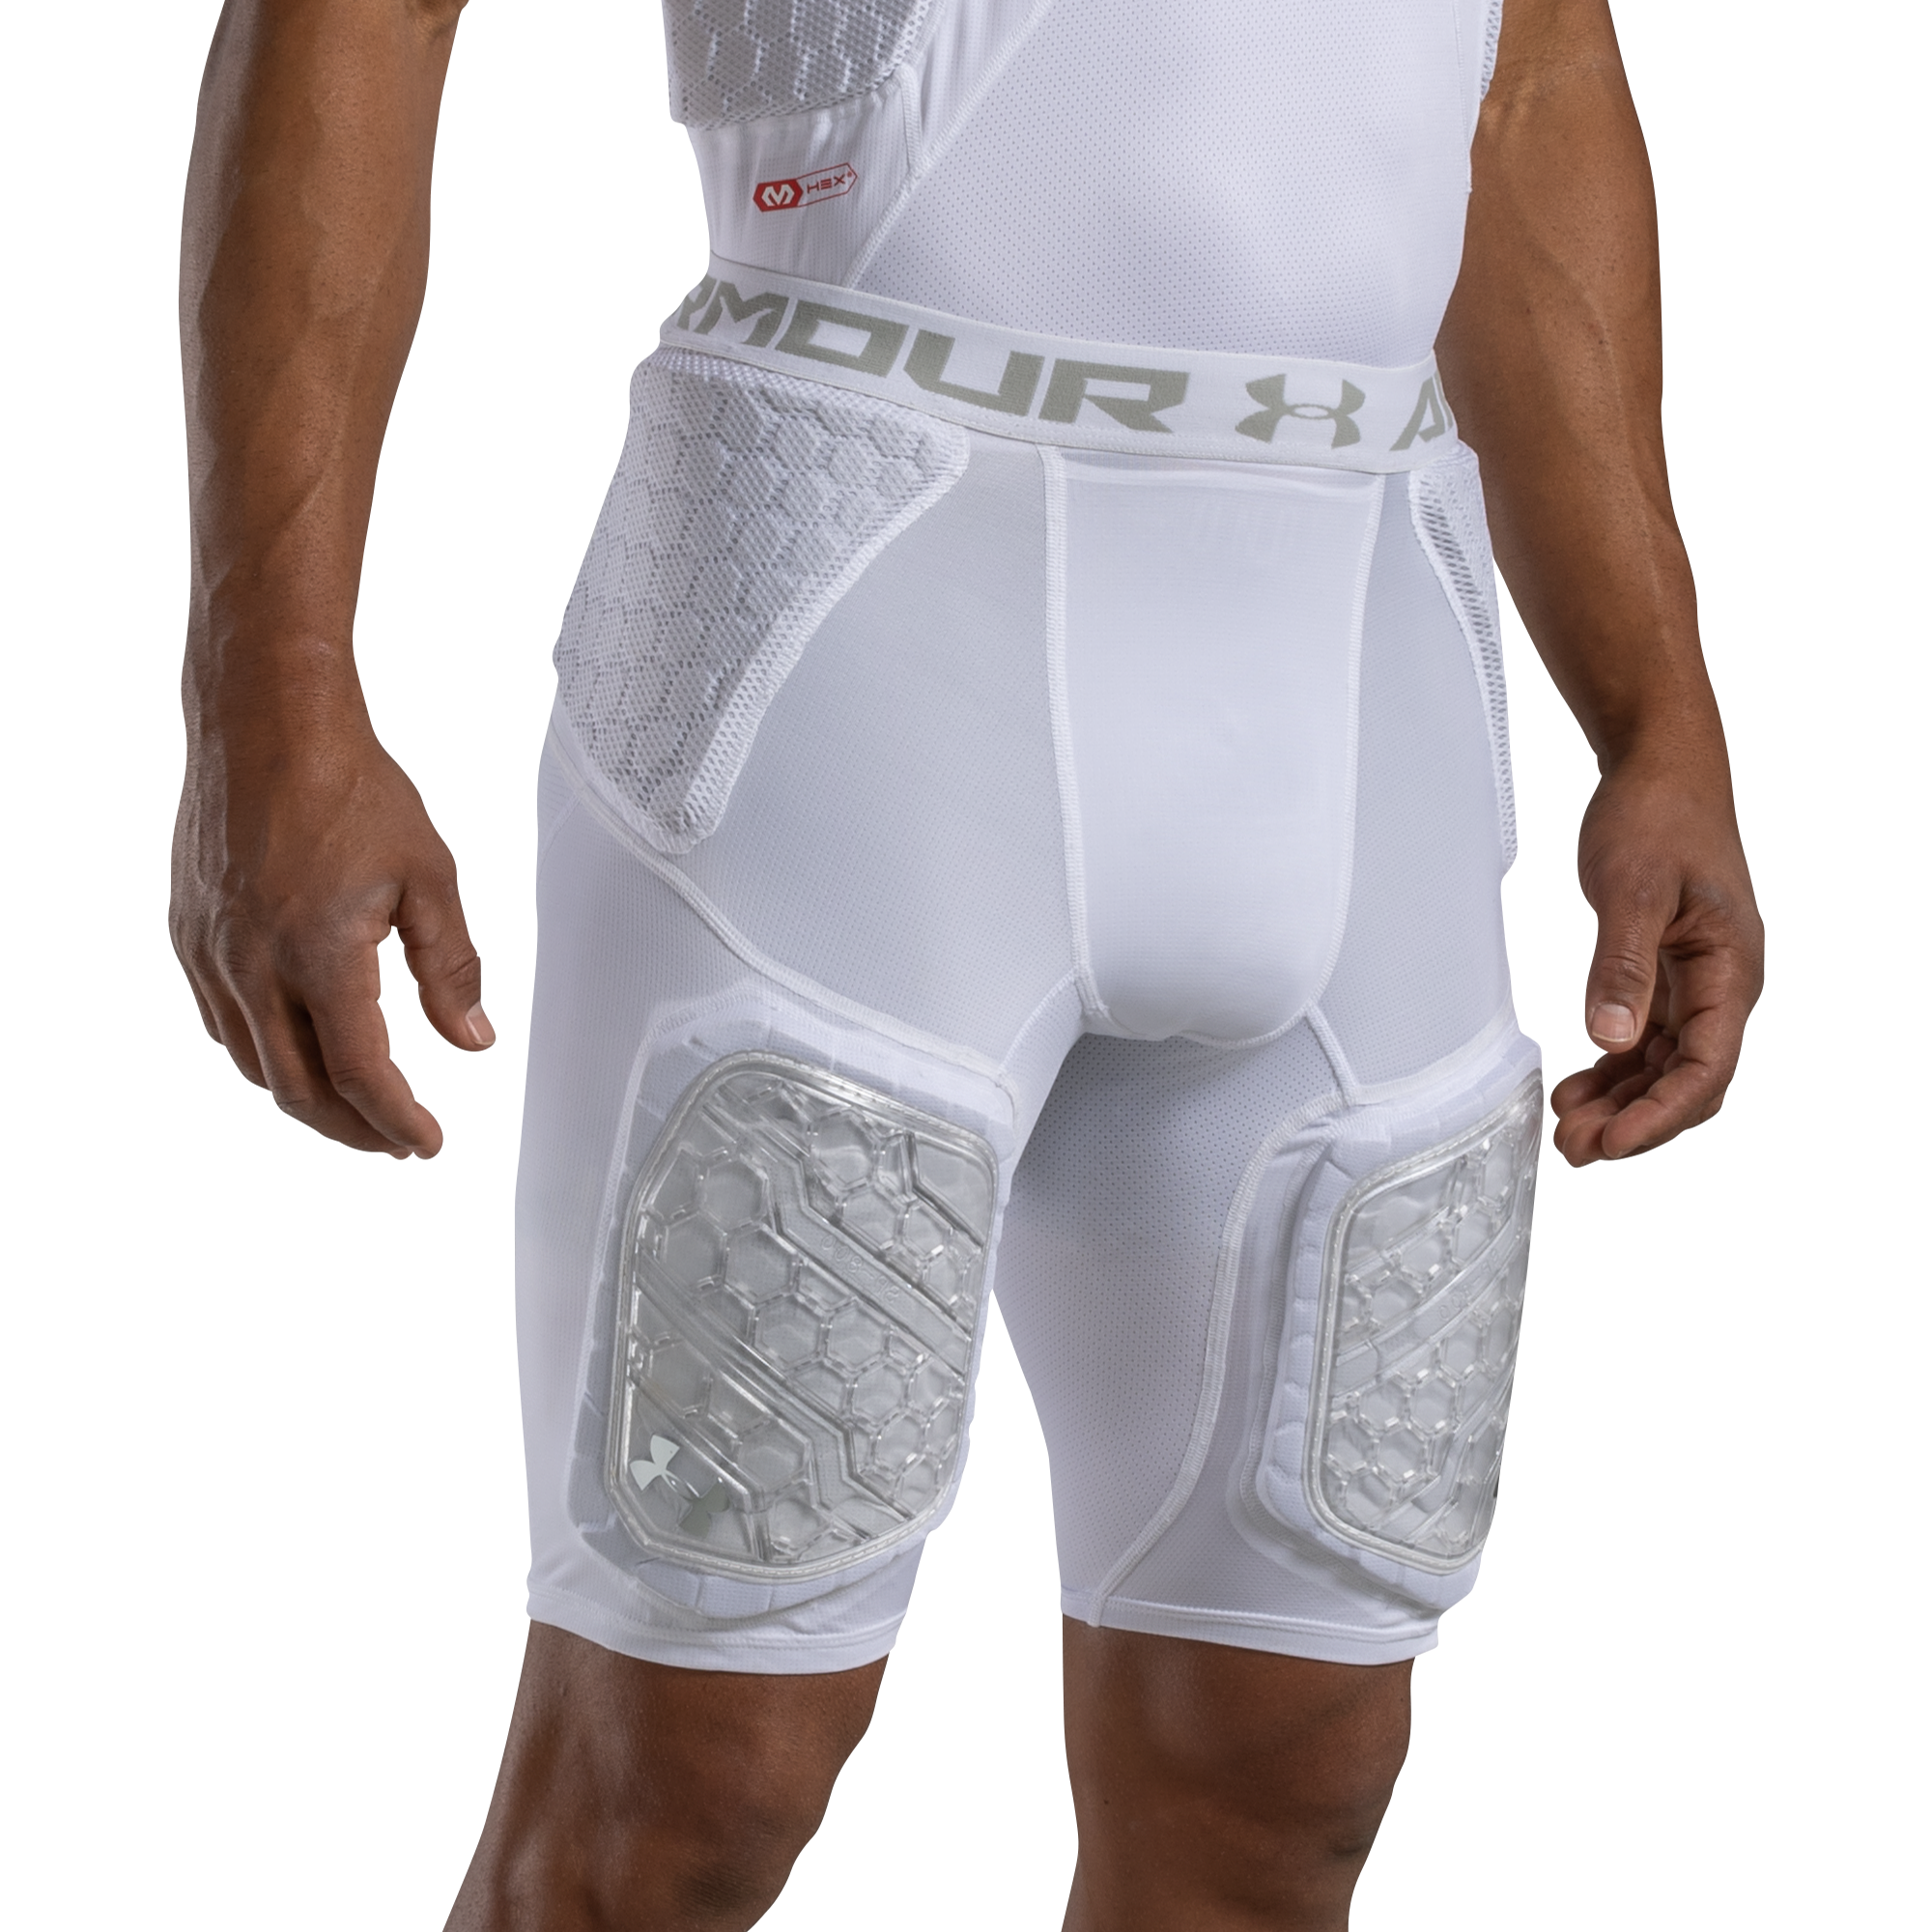 Large Football Padded Shorts Adult White Youth & Adult sizes Under Armour Gameday Pro 5-Pad Football Compression Girdle/ Shorts 